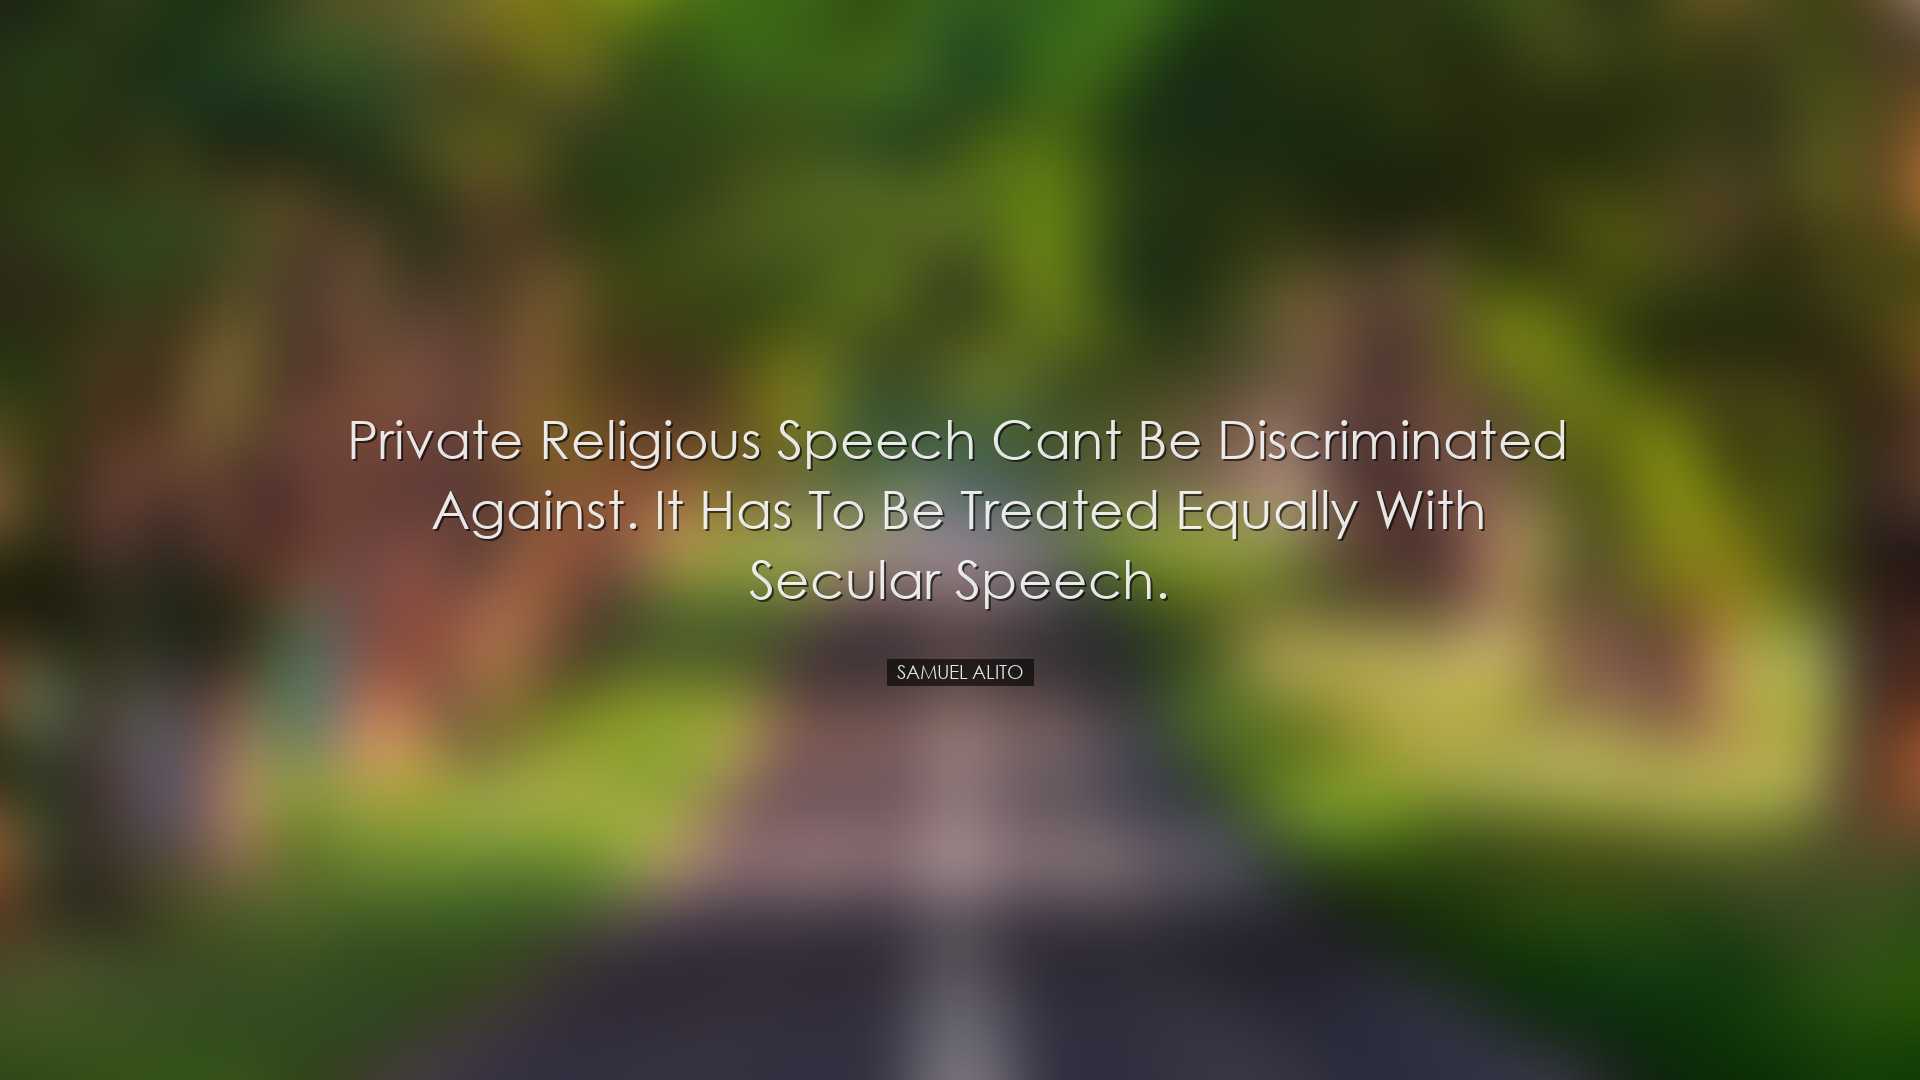 Private religious speech cant be discriminated against. It has to